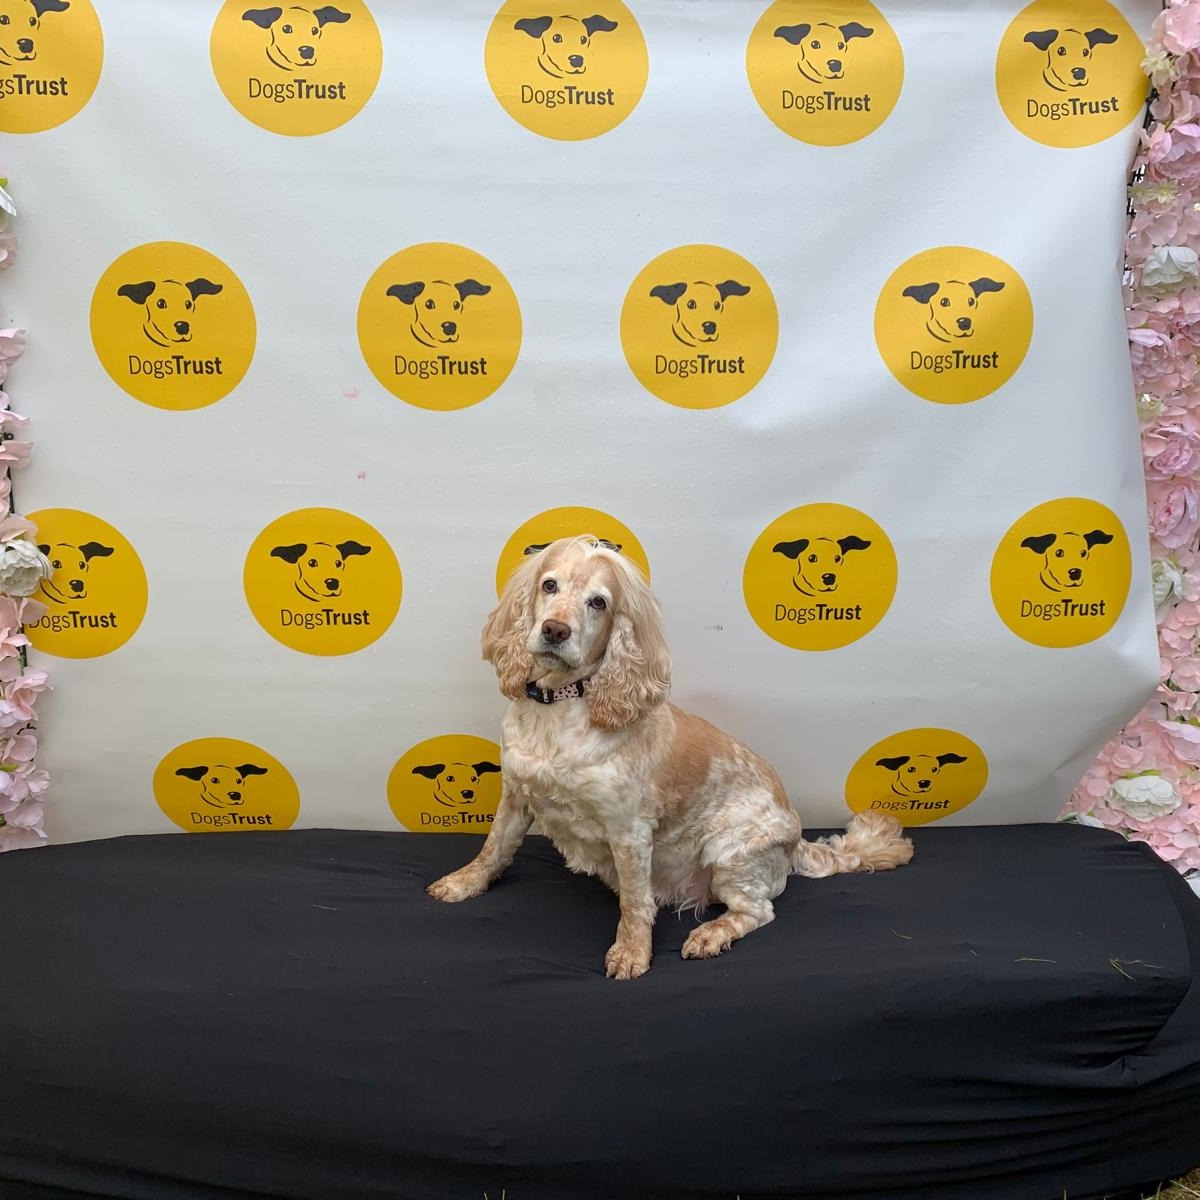 We can’t wait for the second @DogfestUK event 25 & 26 May at Ragley Hall! 🤩 We will be there at our #DogsTrustVillage – just head for the yellow to say hello 💛 Dont forget, 15% of your ticket price will come back to us here at Dogs Trust! Book today 👉 bit.ly/3Okheap